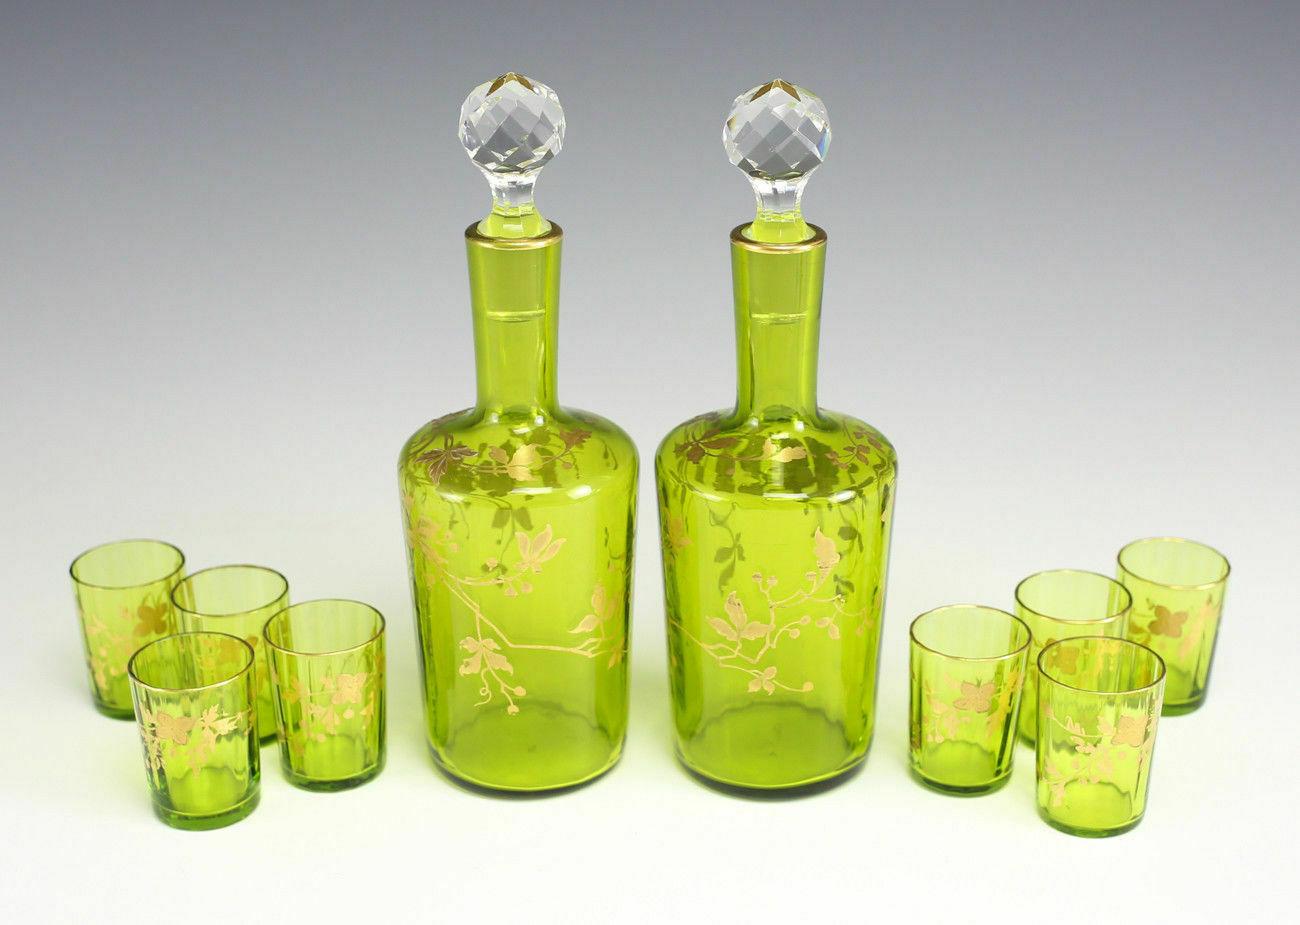 10pc set Czech Bohemian Moser hand painted double carafes & 8 glasses.

10pc set unmarked Moser, Czech / Czechoslovak Bohemian hand painted twin carafes and 8 glasses of appetizer, apple or lime. Relief golden leaves and ivy on subtly fluted